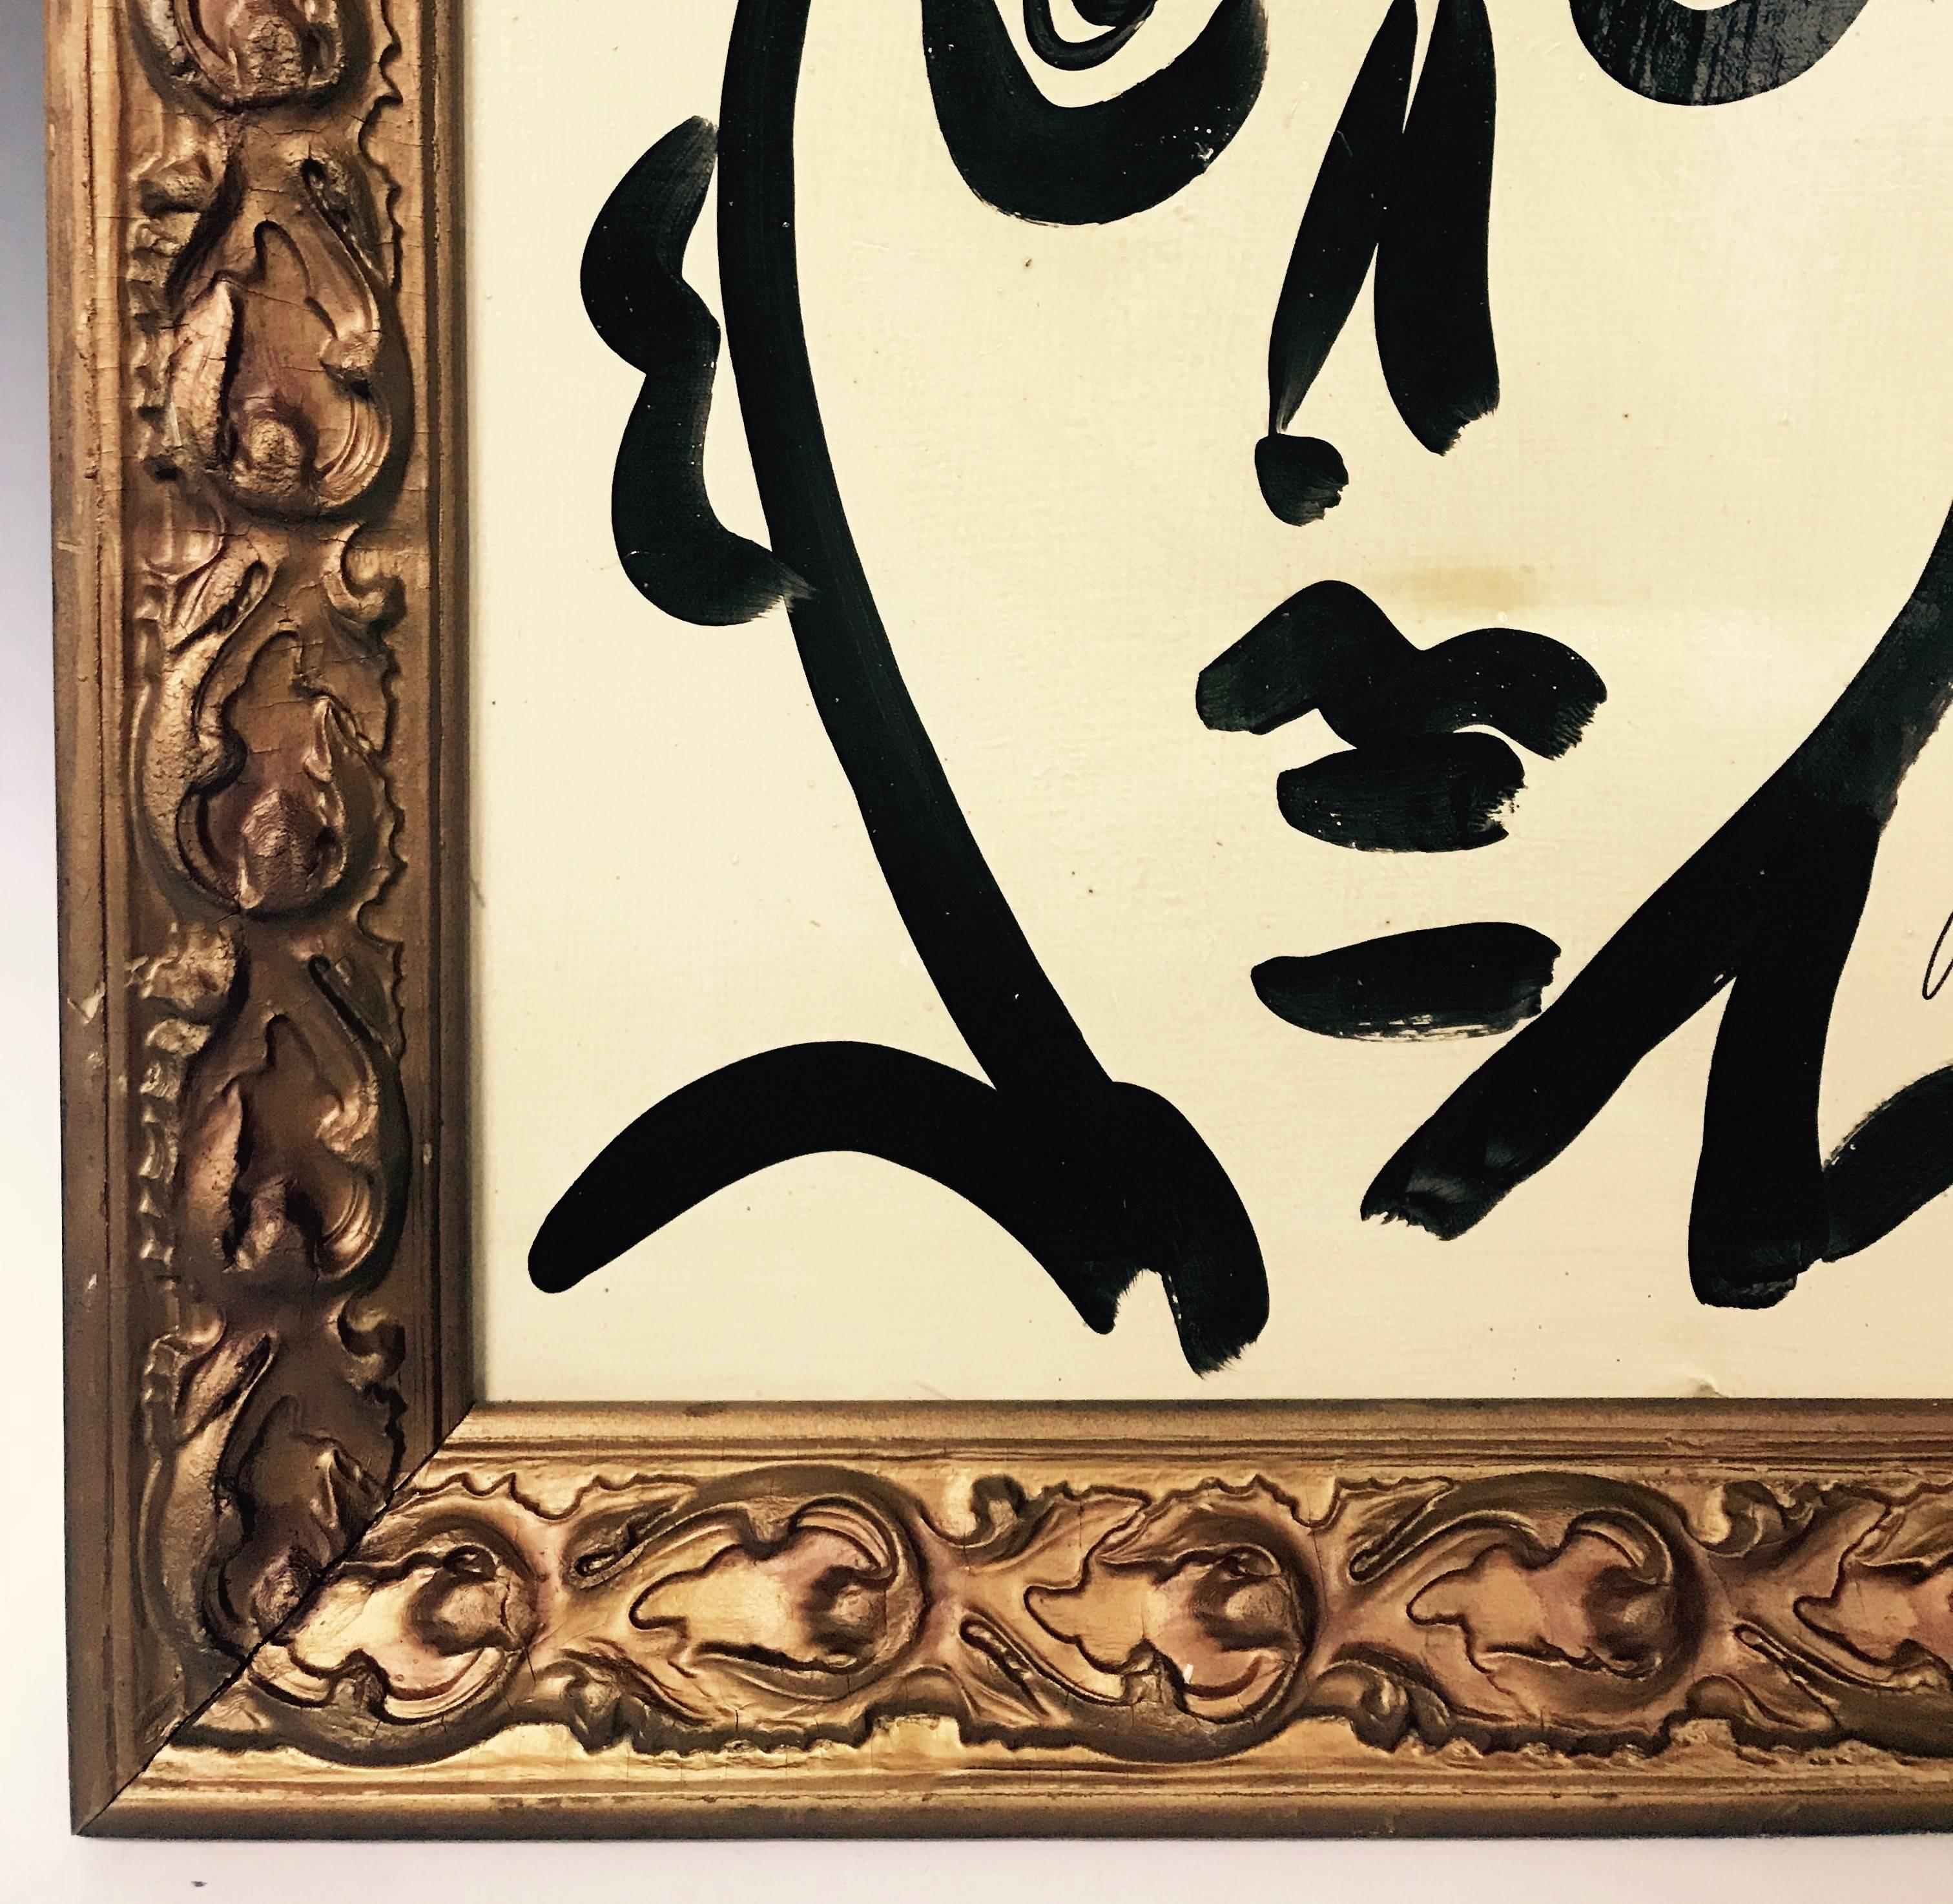 An Abstract framed oil on board portrait painting titled 'Lover Boy' painted by Peter Robert Keil. The piece was created in 1967, in the artist's 'Studio Miro' and signed on the back. The piece is in great vintage condition.